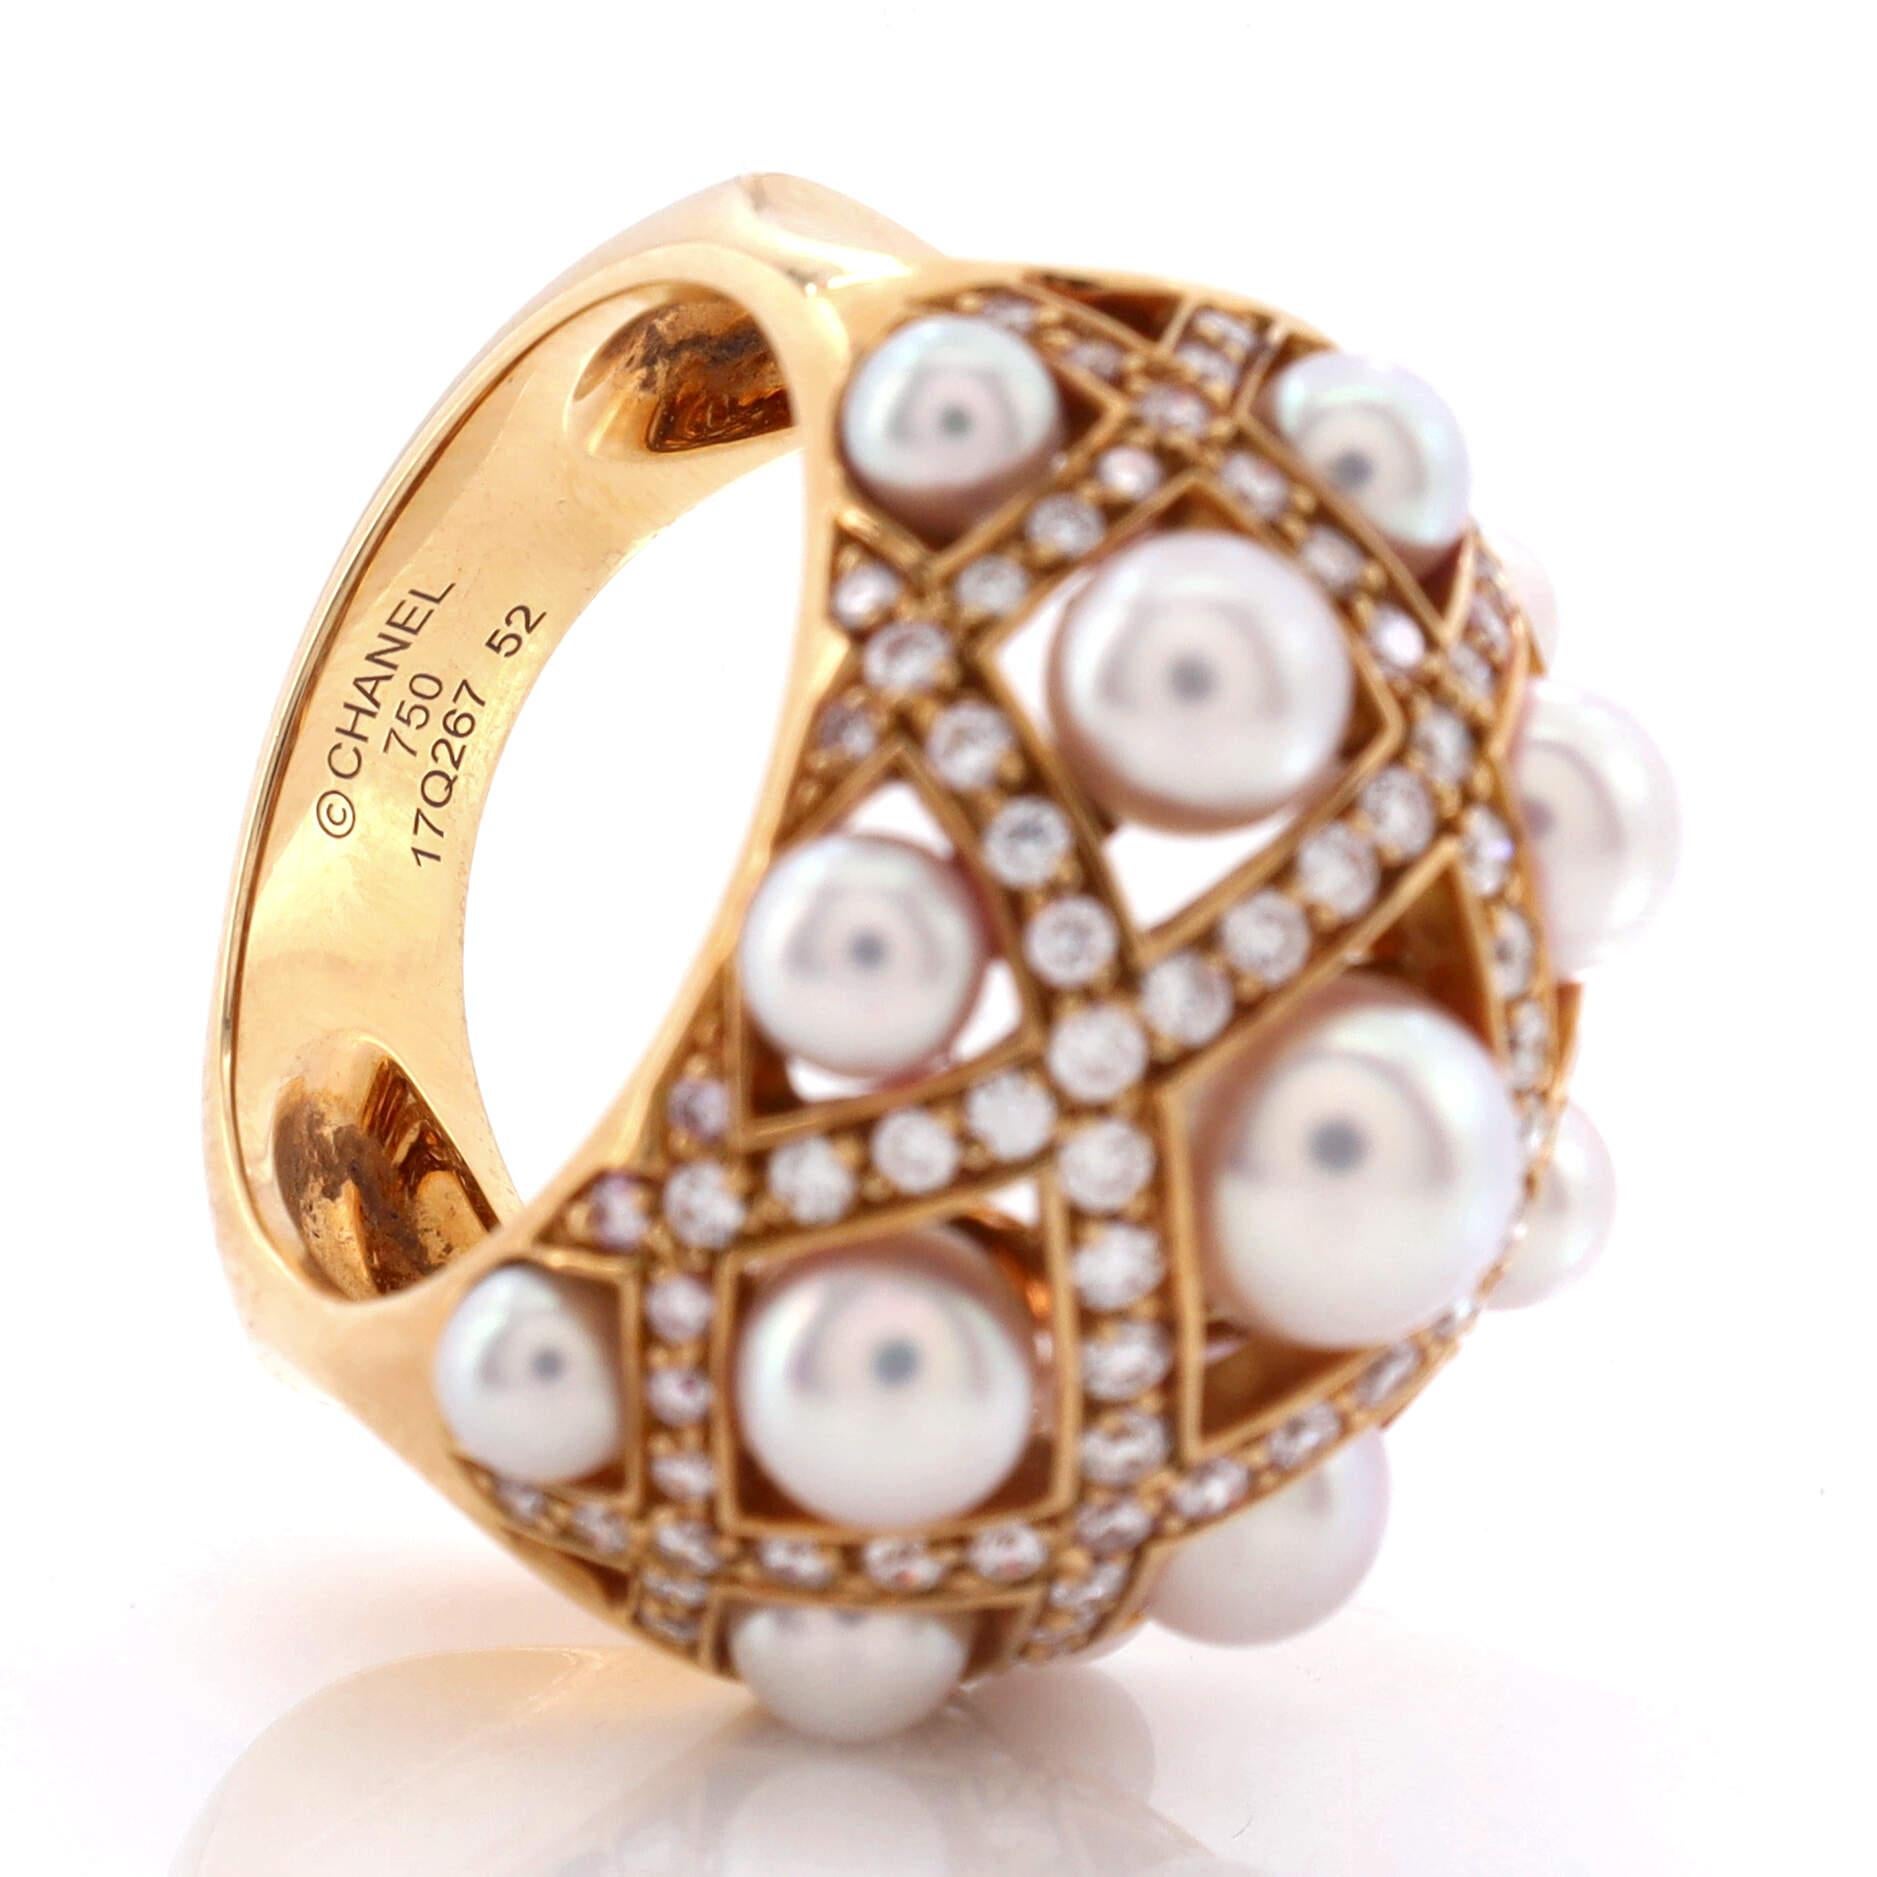 Chanel Perles Matelasse Ring 18k Yellow Gold with Cultured Pearls and Diamonds 1